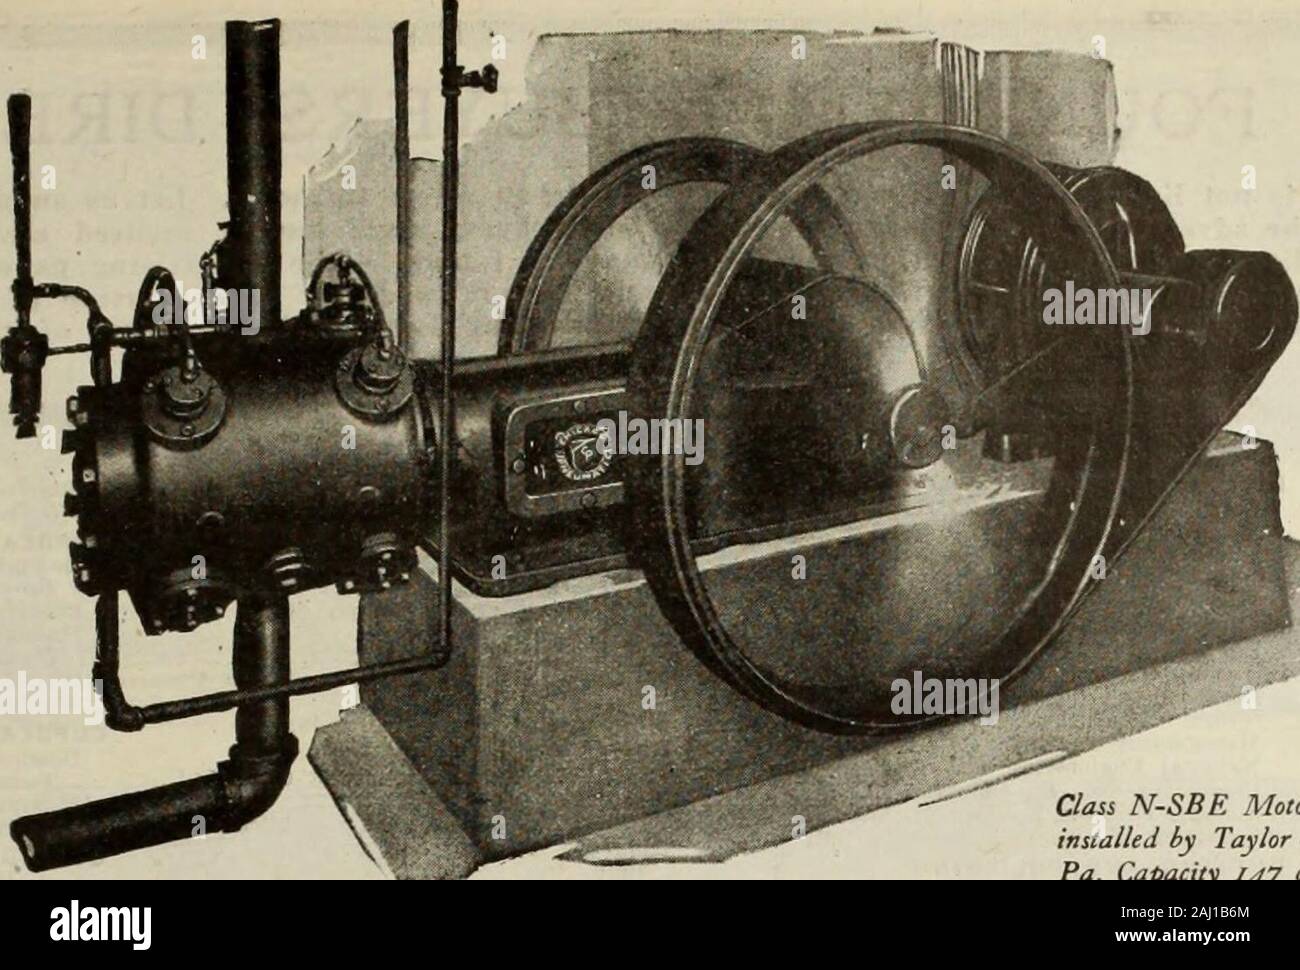 Canadian foundryman (1921) . Bench Rammer—an aid to turning out  clean-cutcastings. M&rch, 1921 CANADIAN FOUNDRY M A N 57. Class N-SBE  Motor-dri-ven Compressorinstalled by Taylor & Dear, Pittsburgh,Pa. Capacity  147 cubic feet